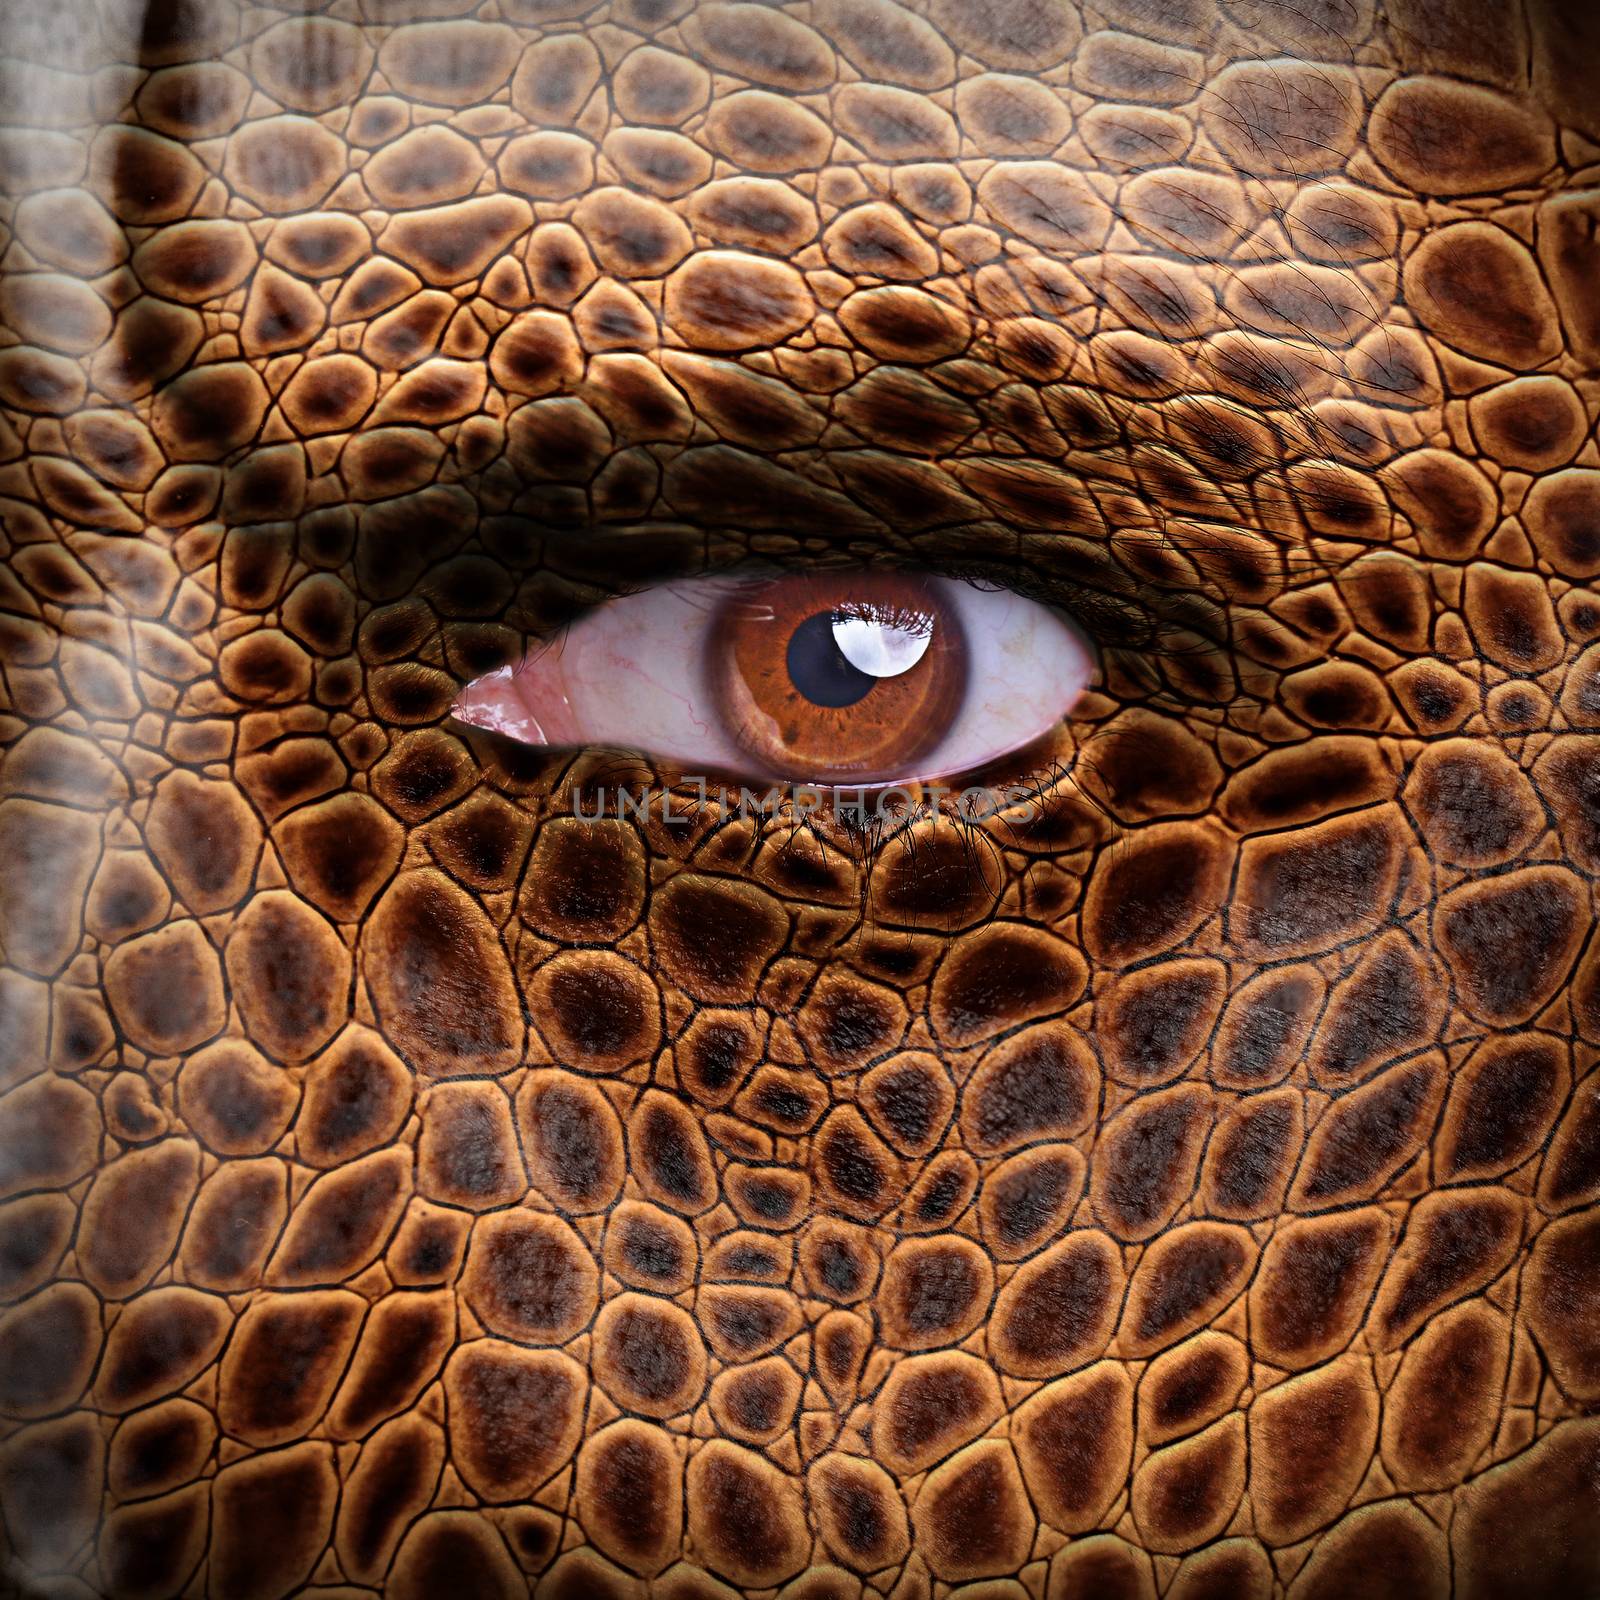 Lizard skin pattern on angry man face - nature concept